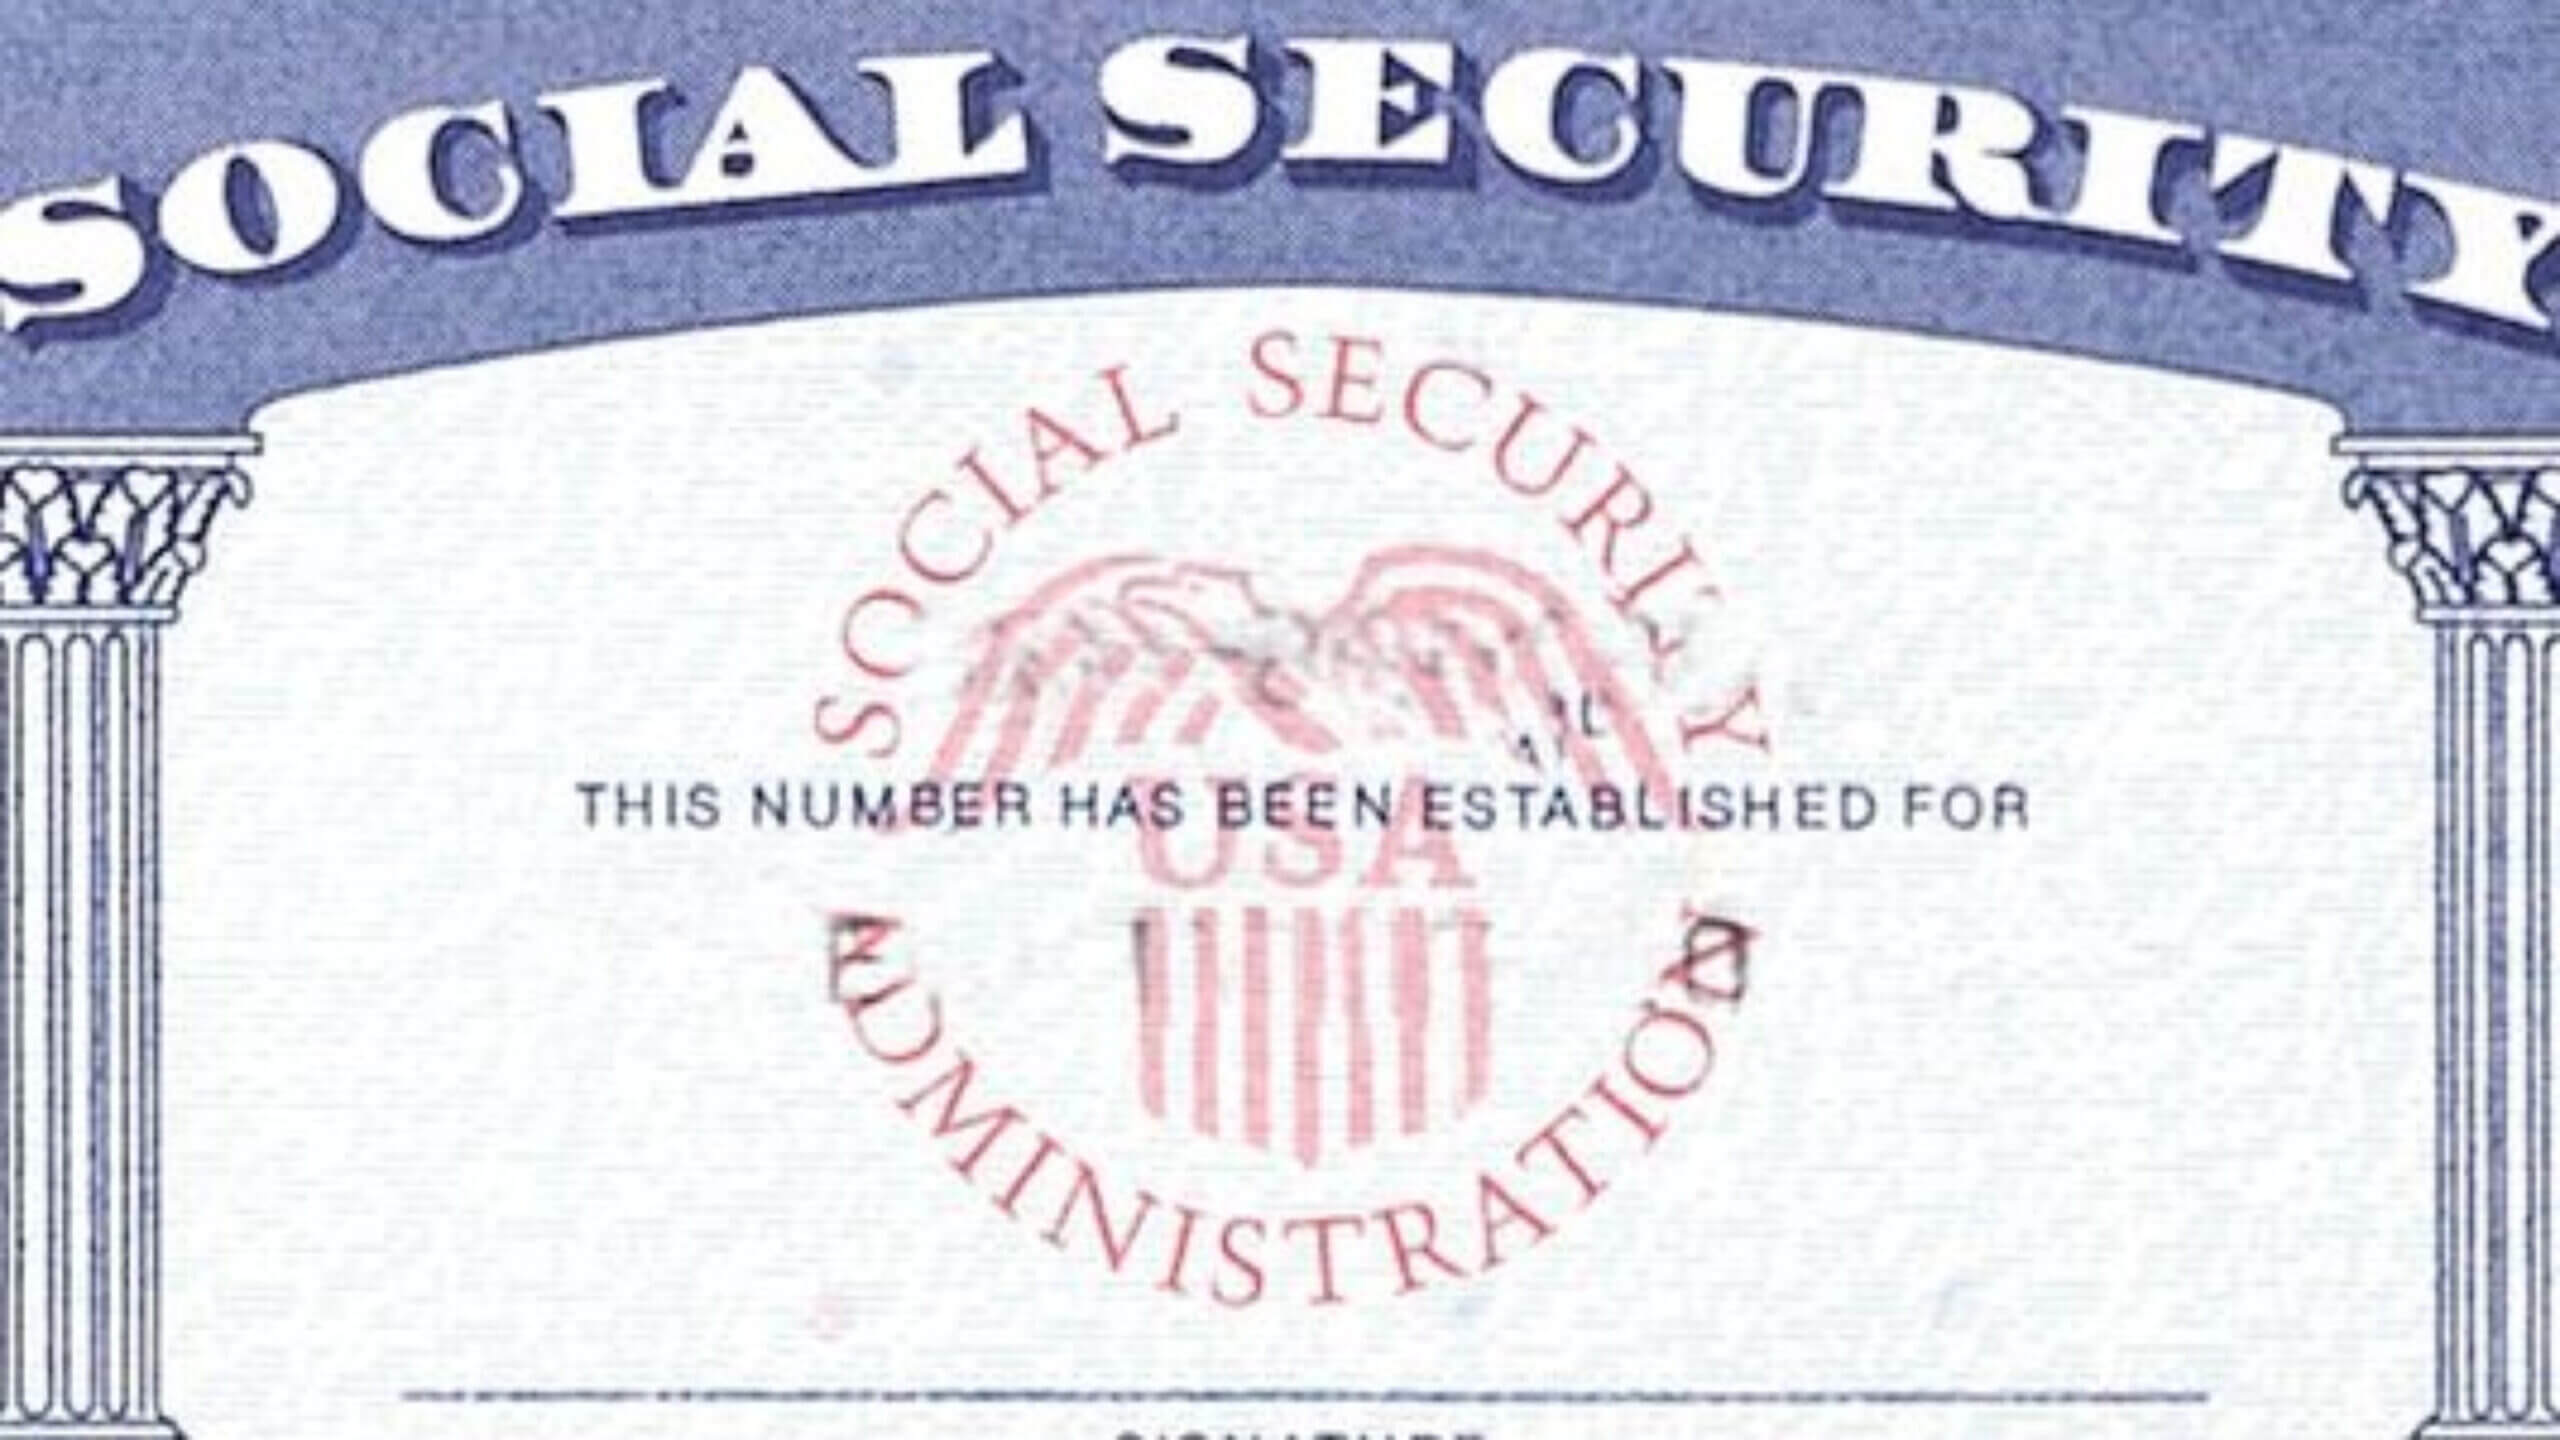 Blank Social Security Card Template Download - Great Throughout Social Security Card Template Download